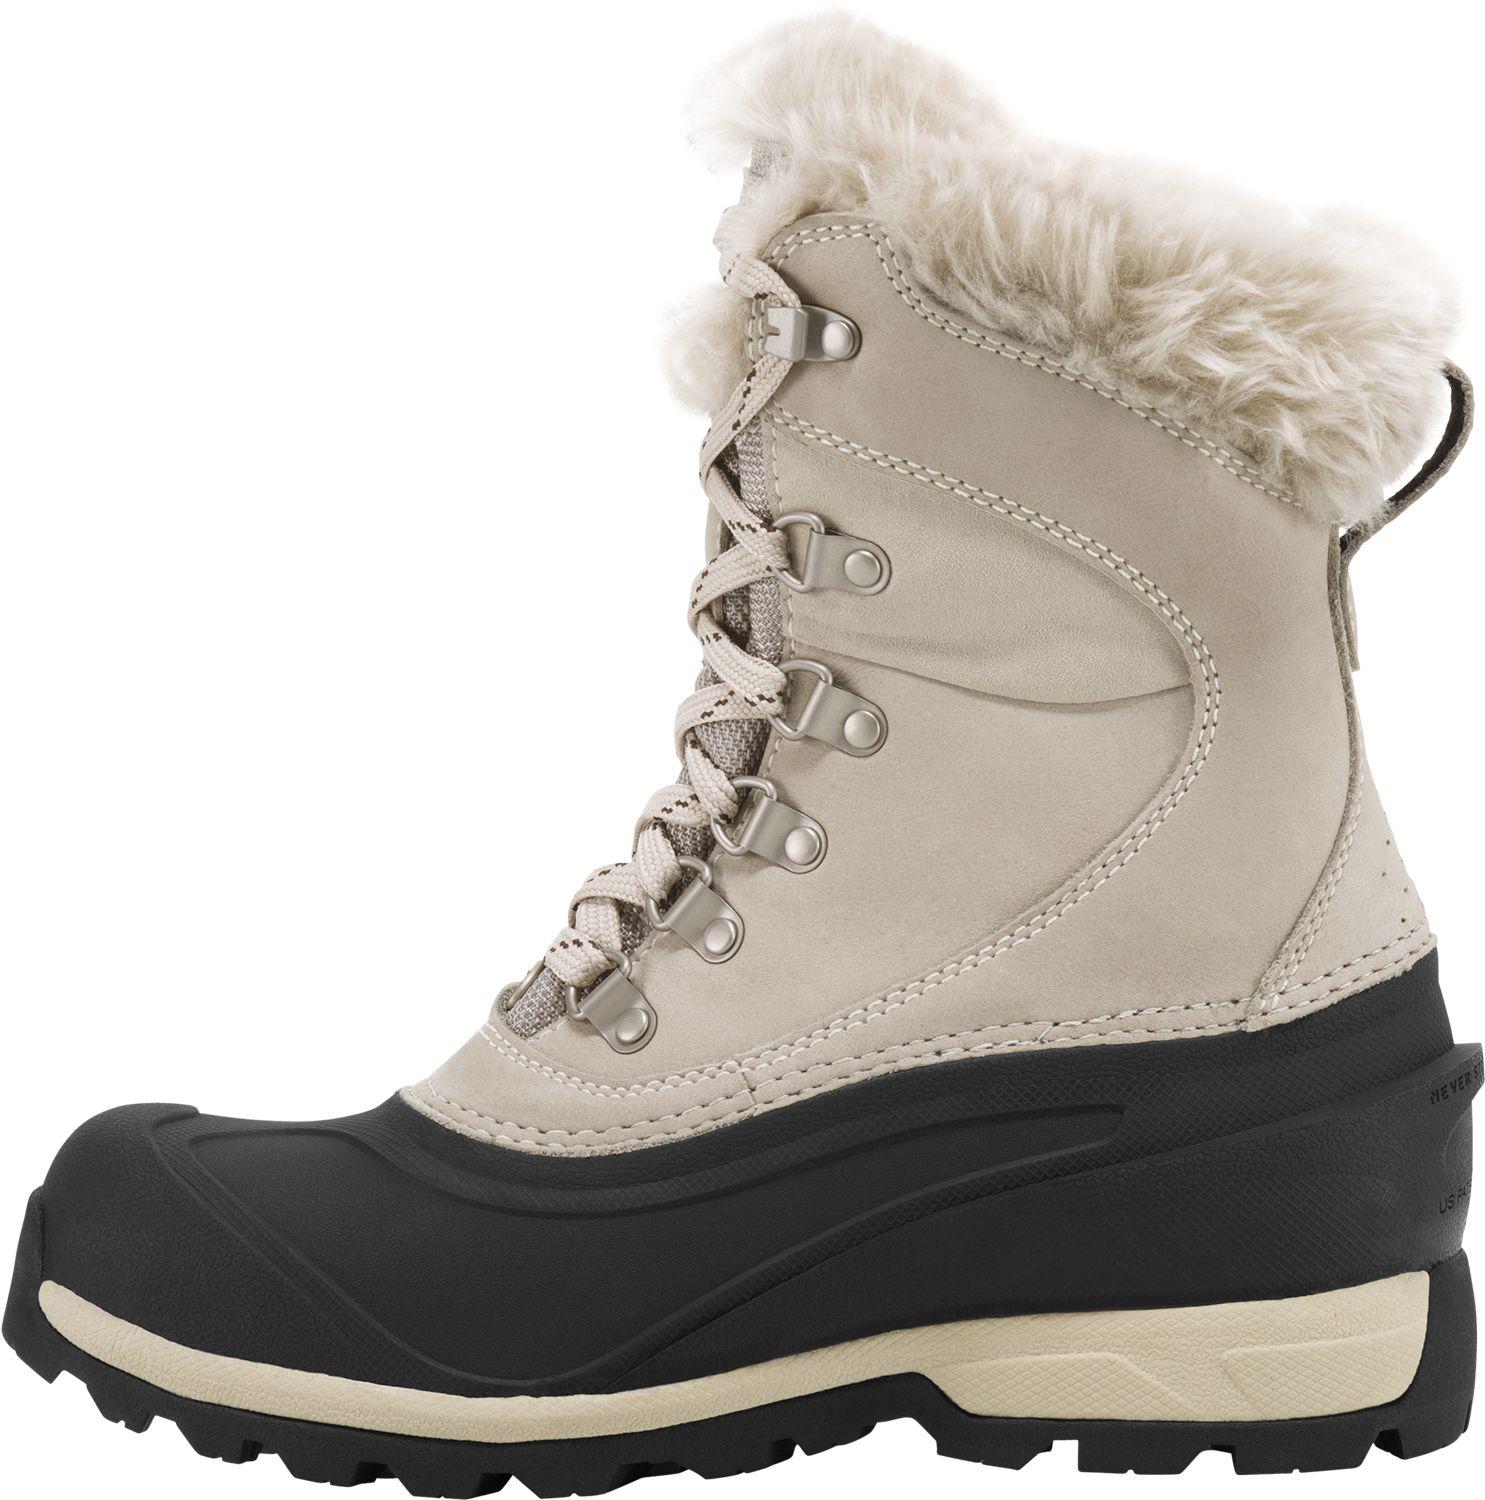 north face waterproof winter boots